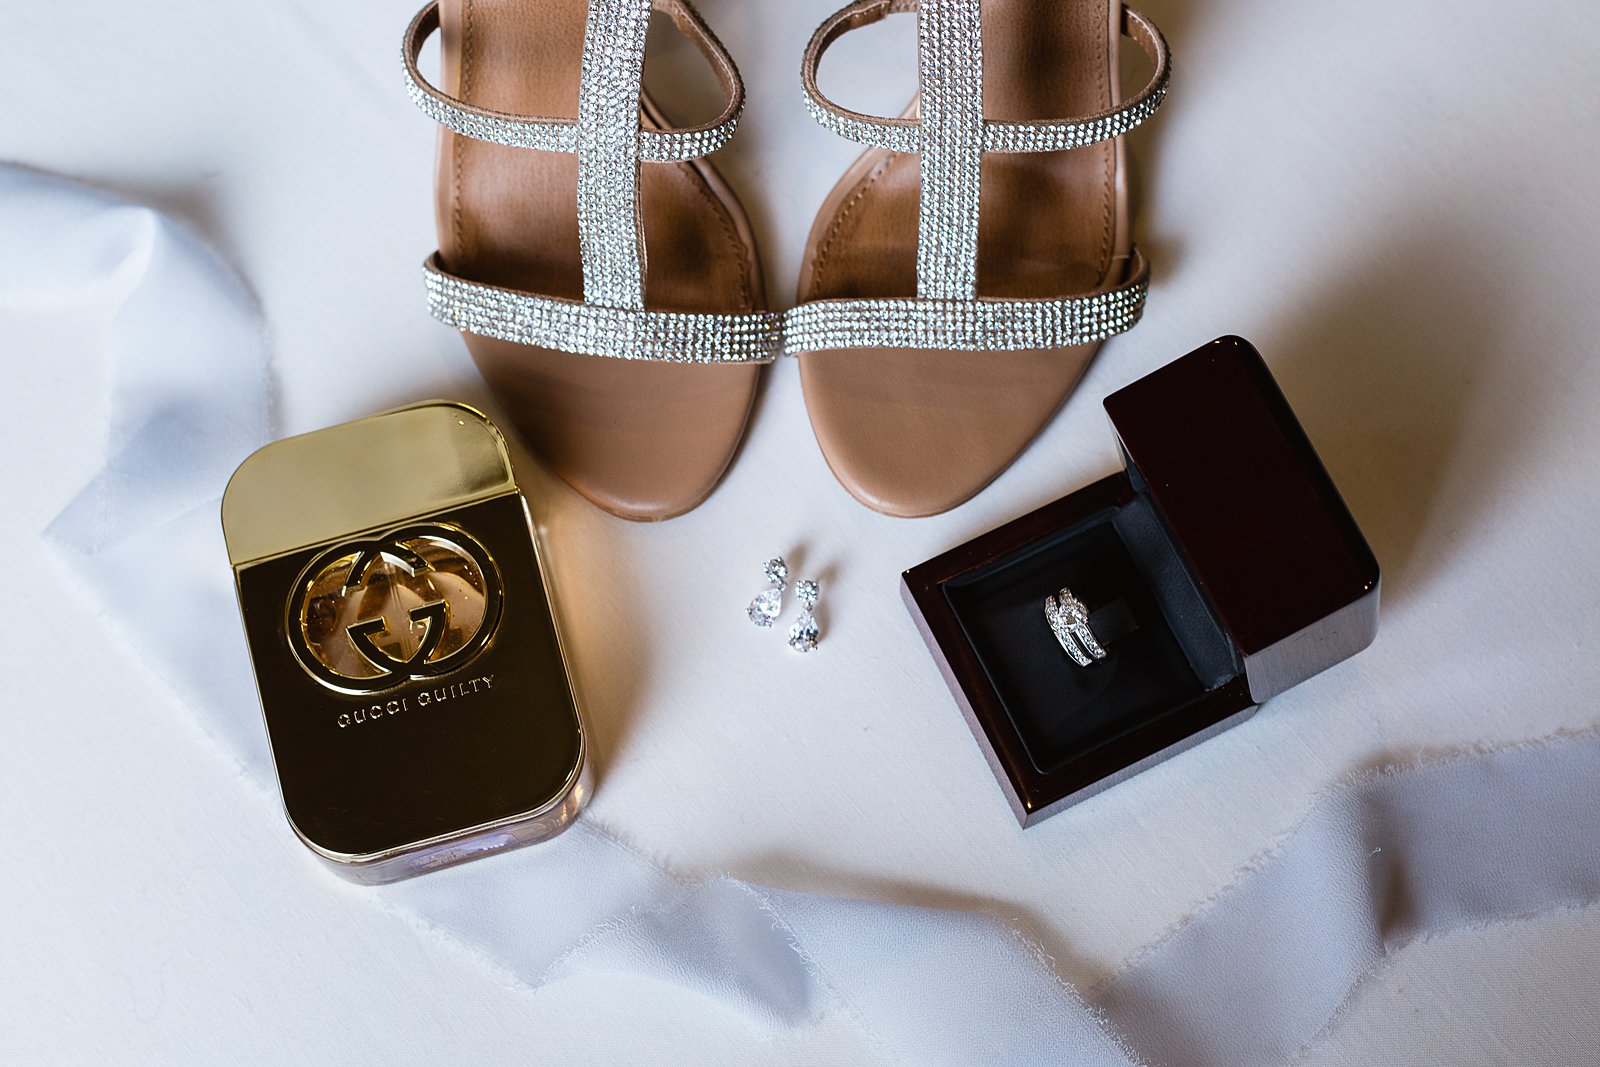 Brides's wedding day details of sparkly shoes, gucci guilty perfume, earrings, and wedding ring by PMA Photography.